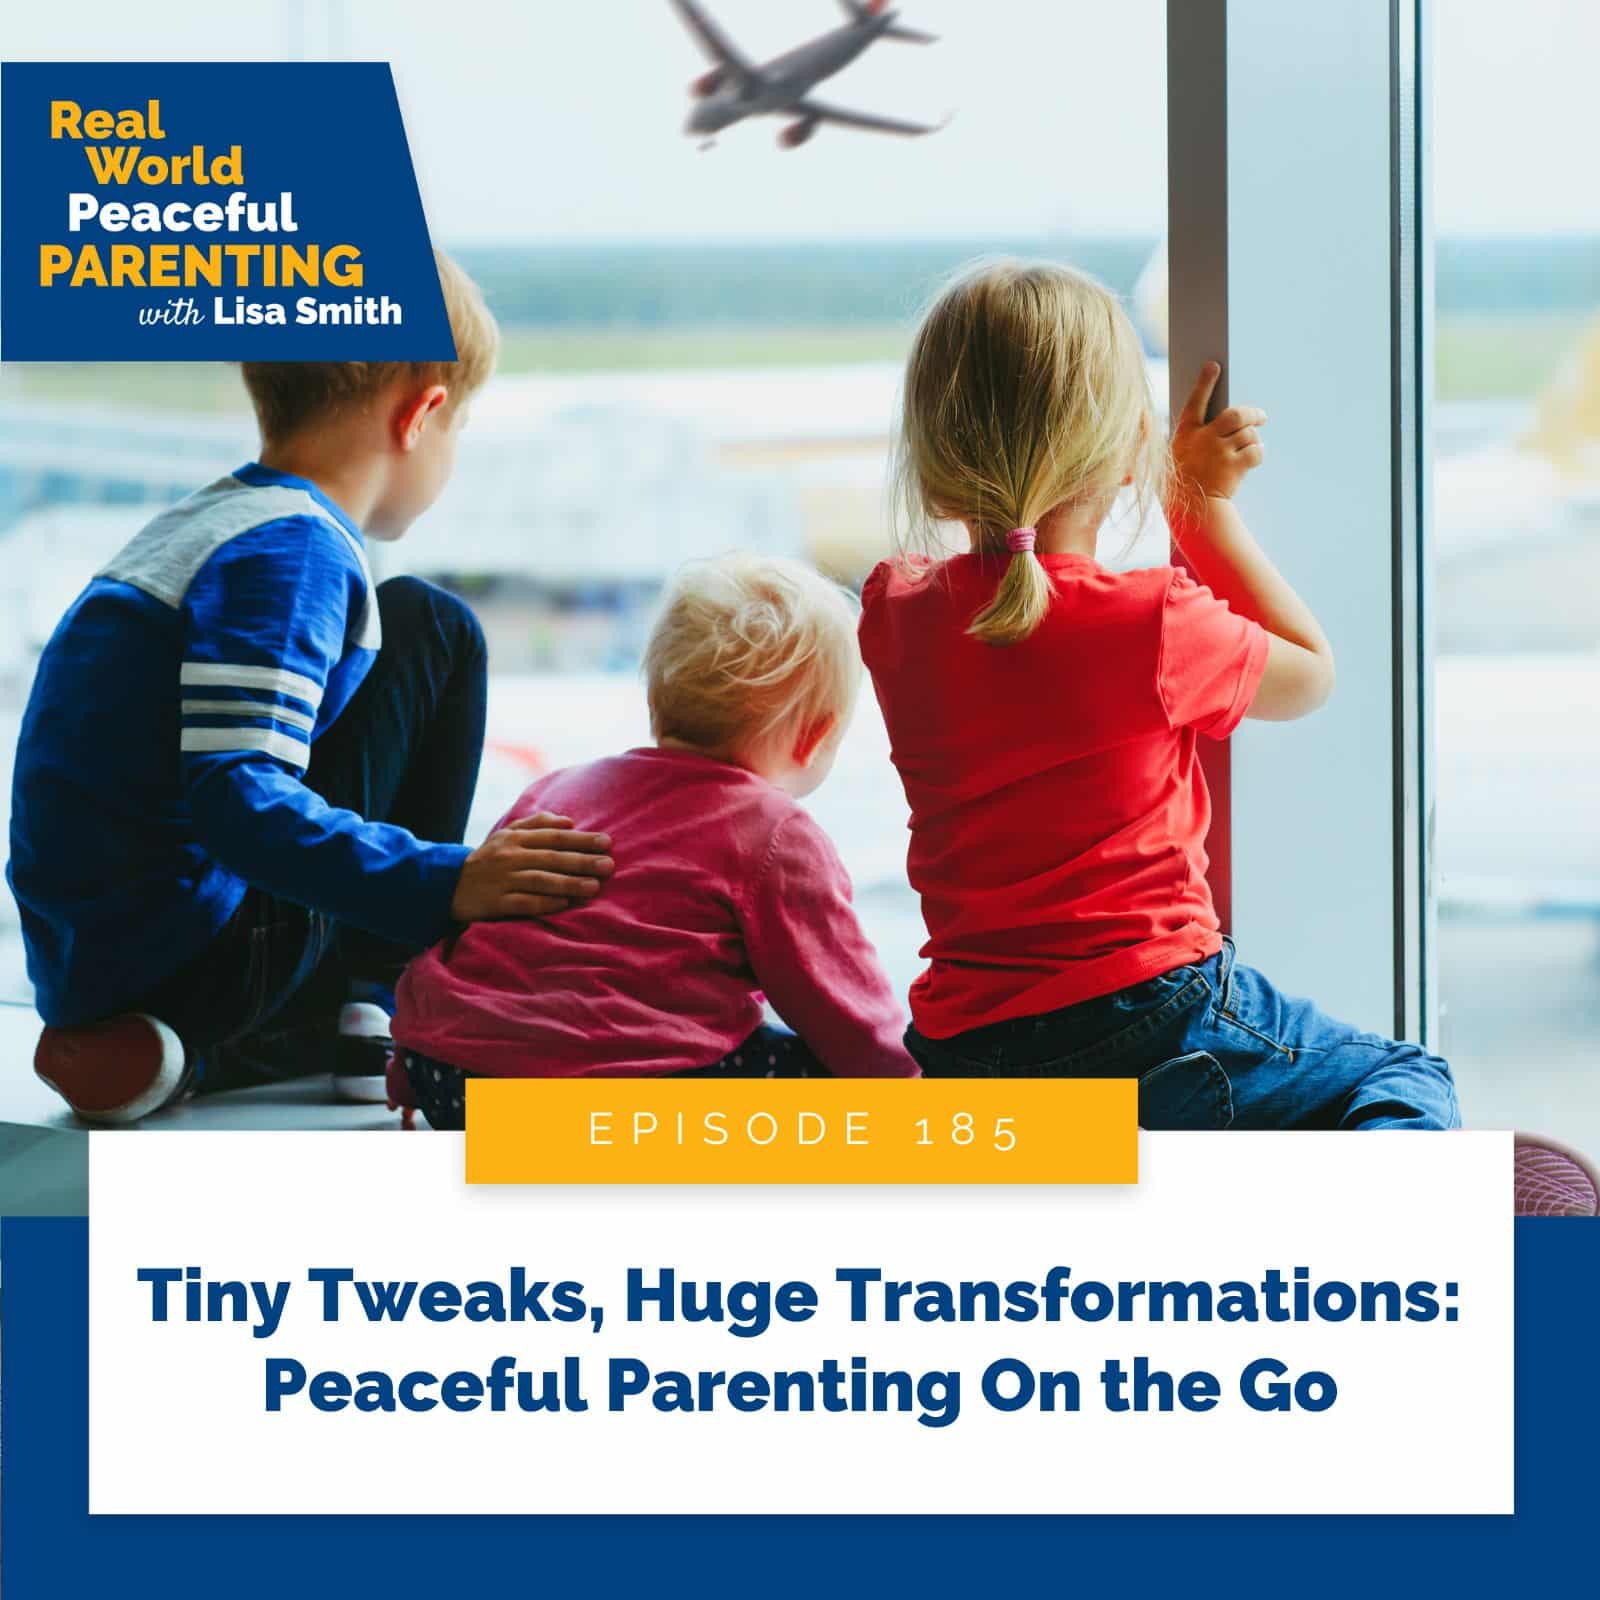 Real World Peaceful Parenting with Lisa Smith | Tiny Tweaks, Huge Transformations: Peaceful Parenting On the Go